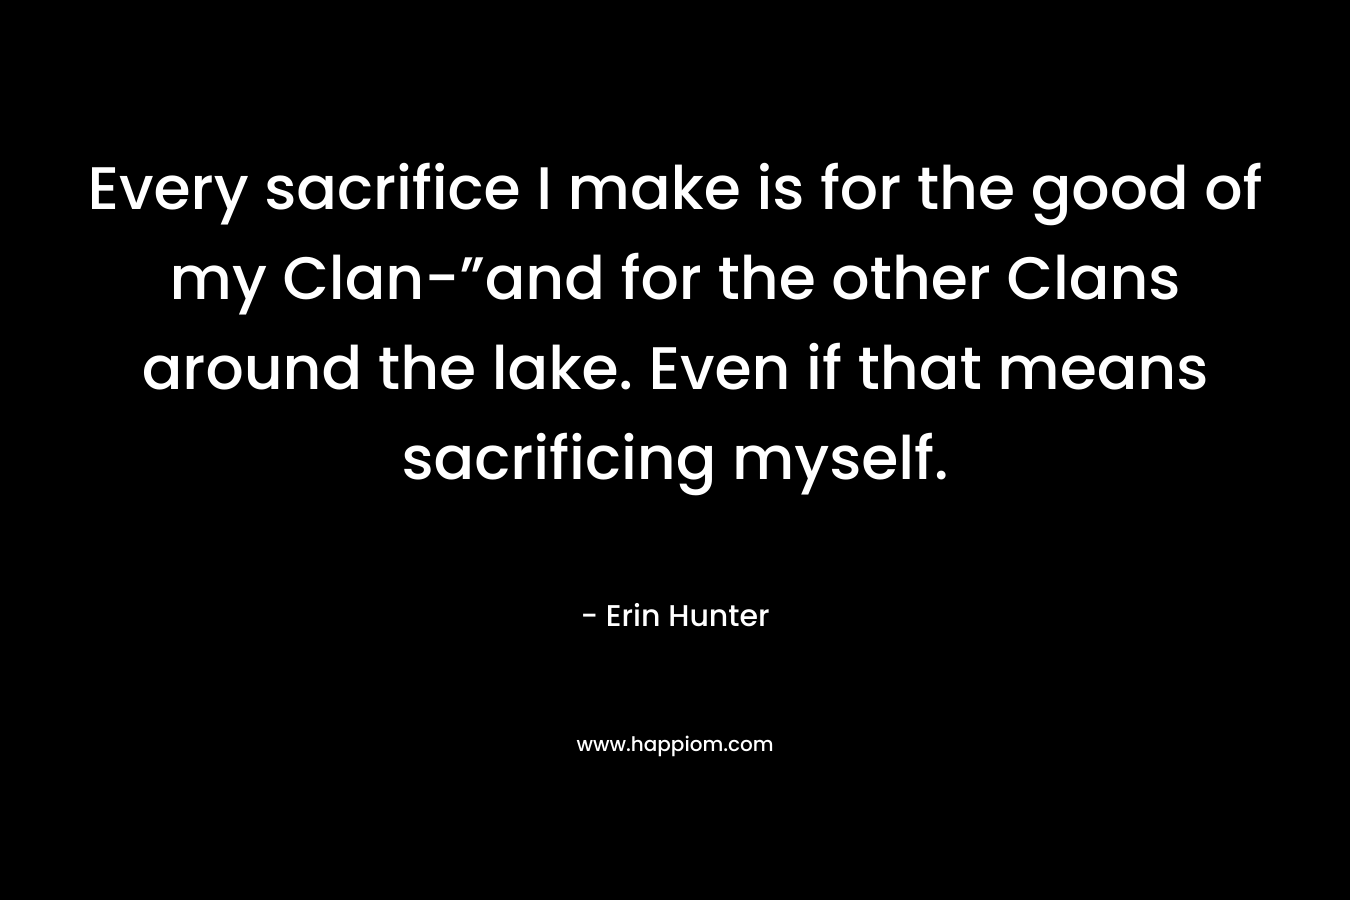 Every sacrifice I make is for the good of my Clan-”and for the other Clans around the lake. Even if that means sacrificing myself. – Erin Hunter